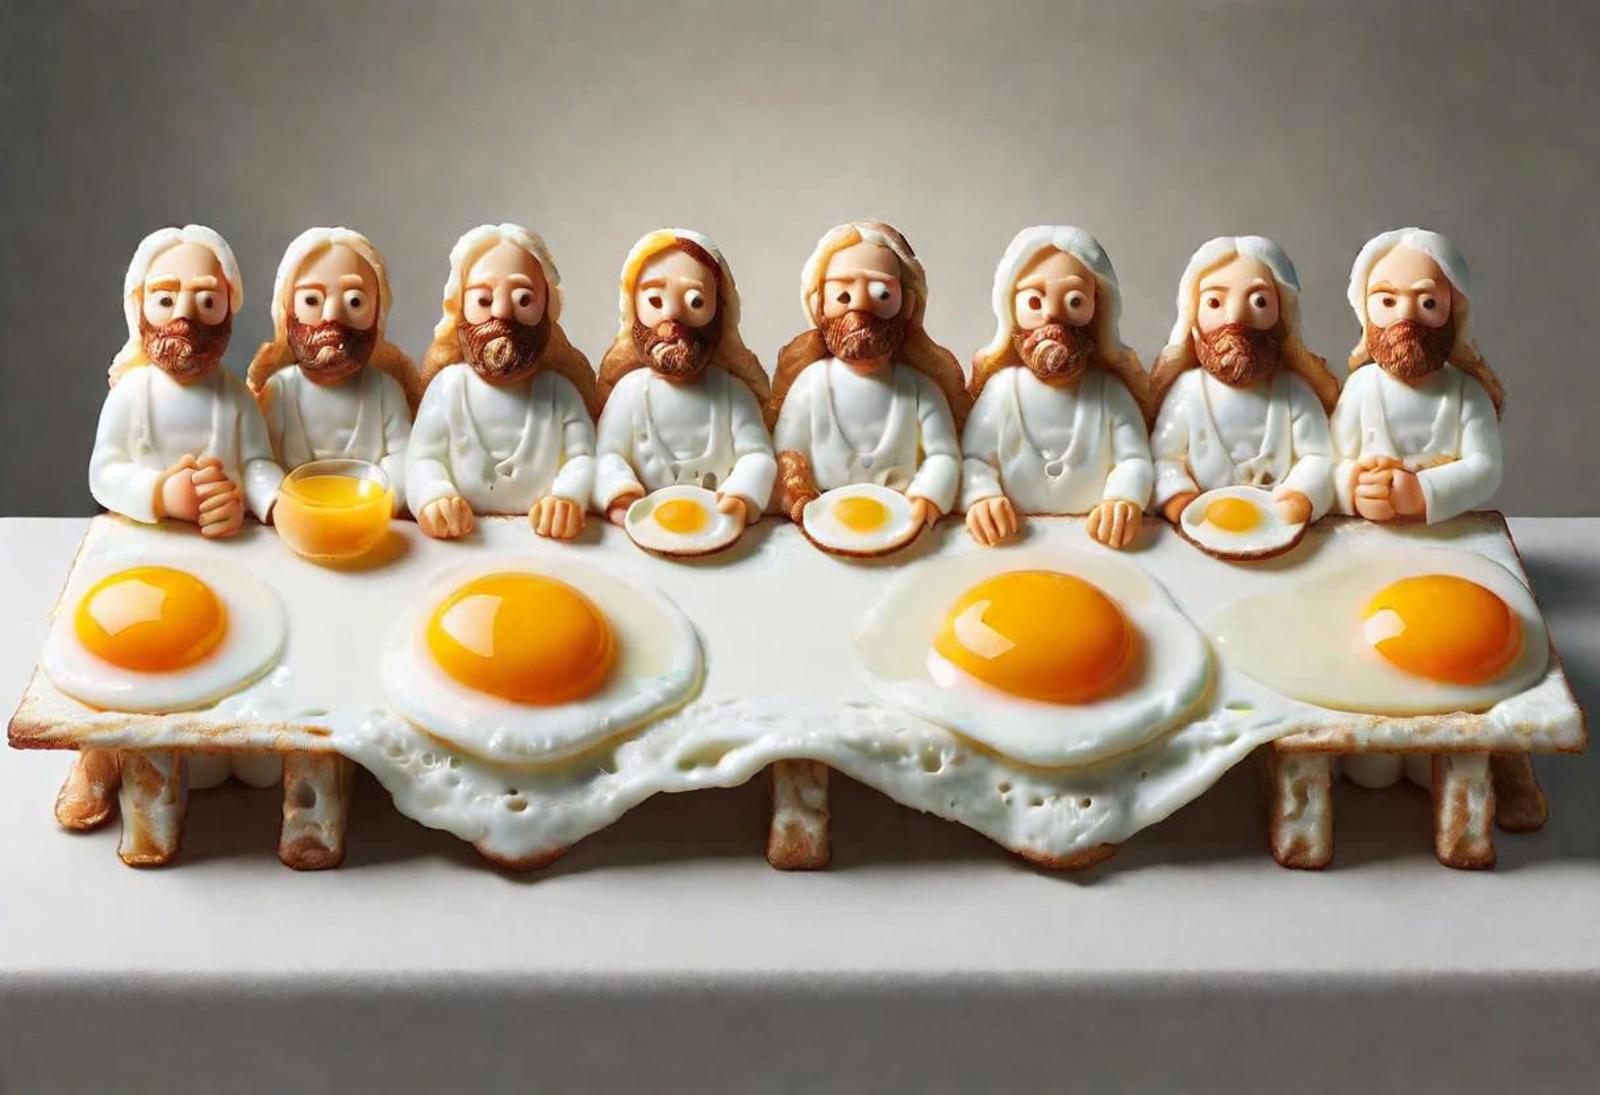 A row of Jesus figurines sitting at a table with plates of eggs.